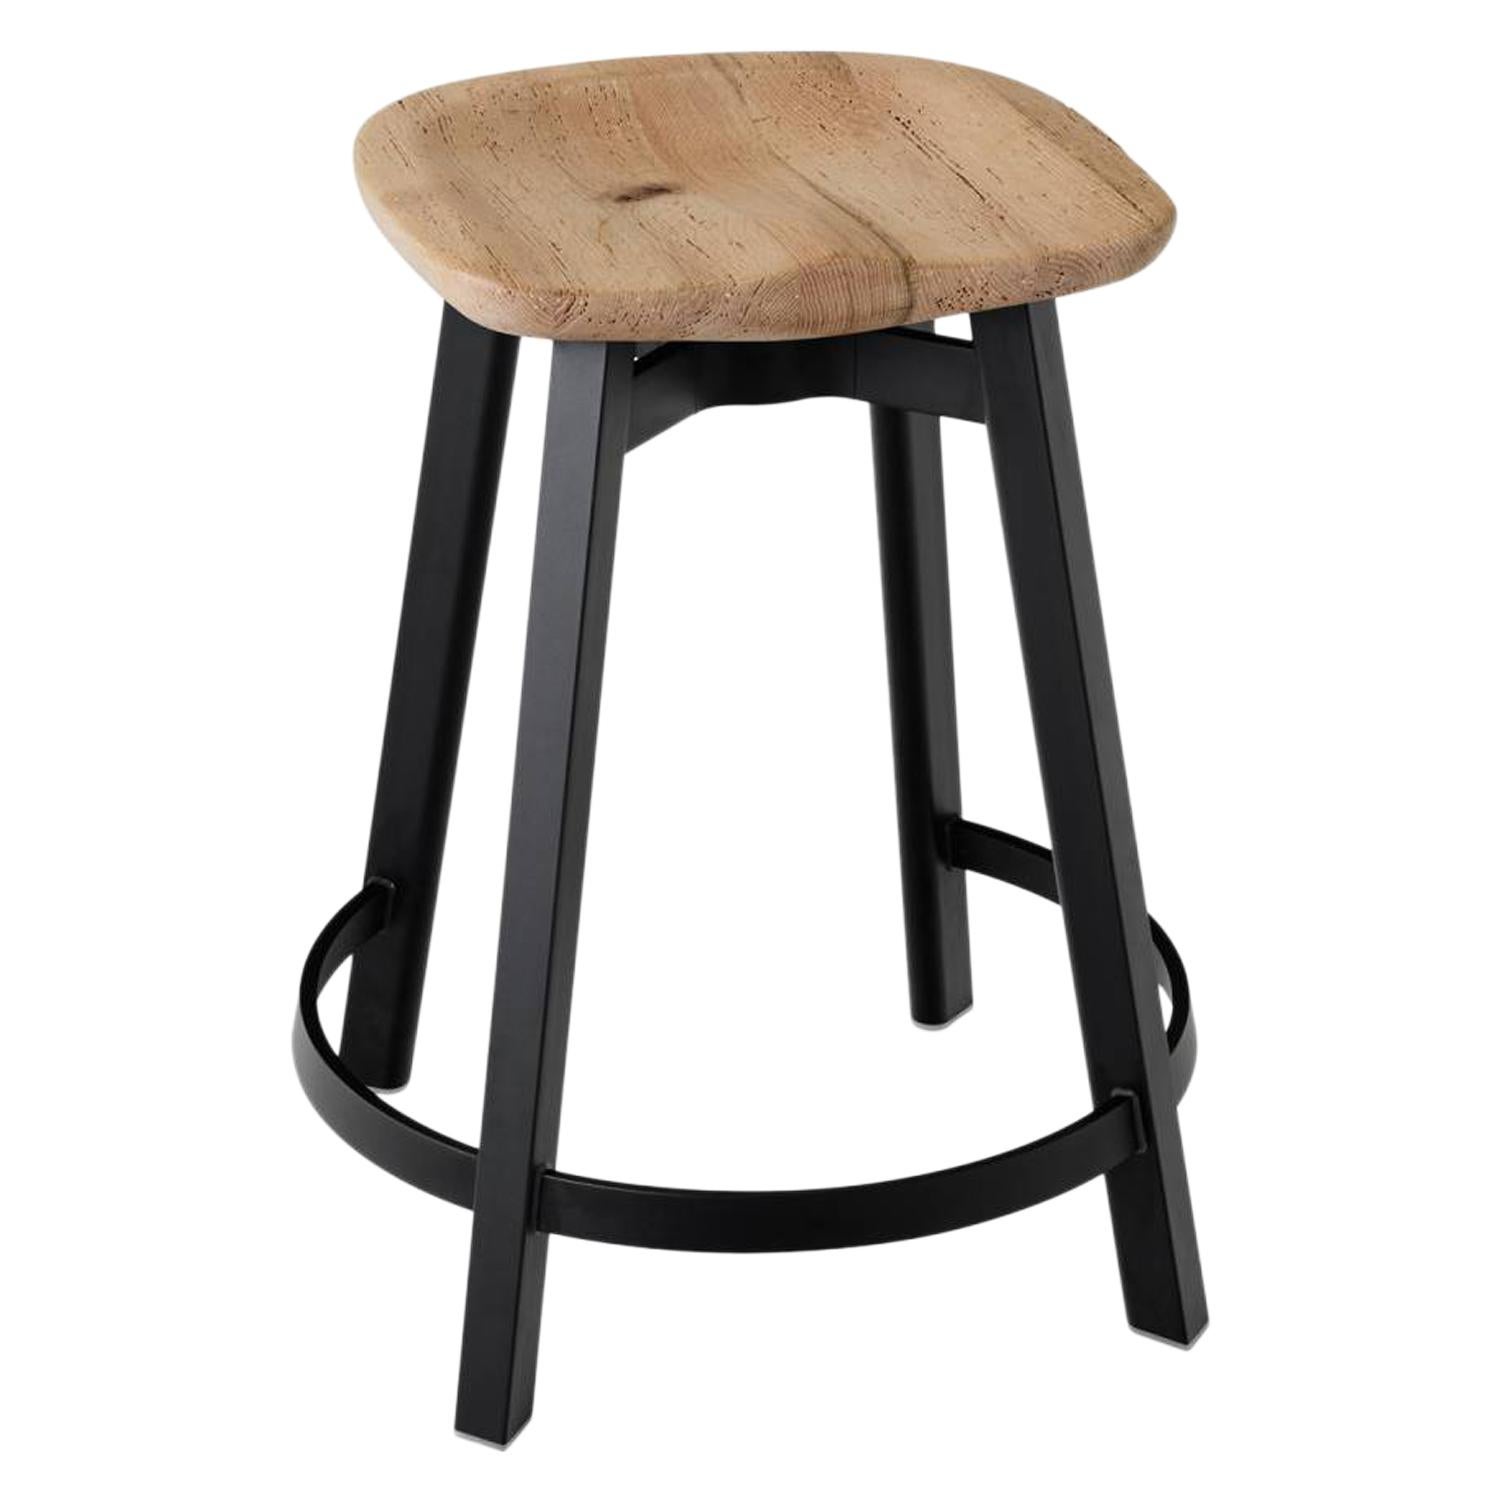 Emeco Su Counter Stool in Black Aluminum with Reclaimed Oak Seat by Nendo For Sale